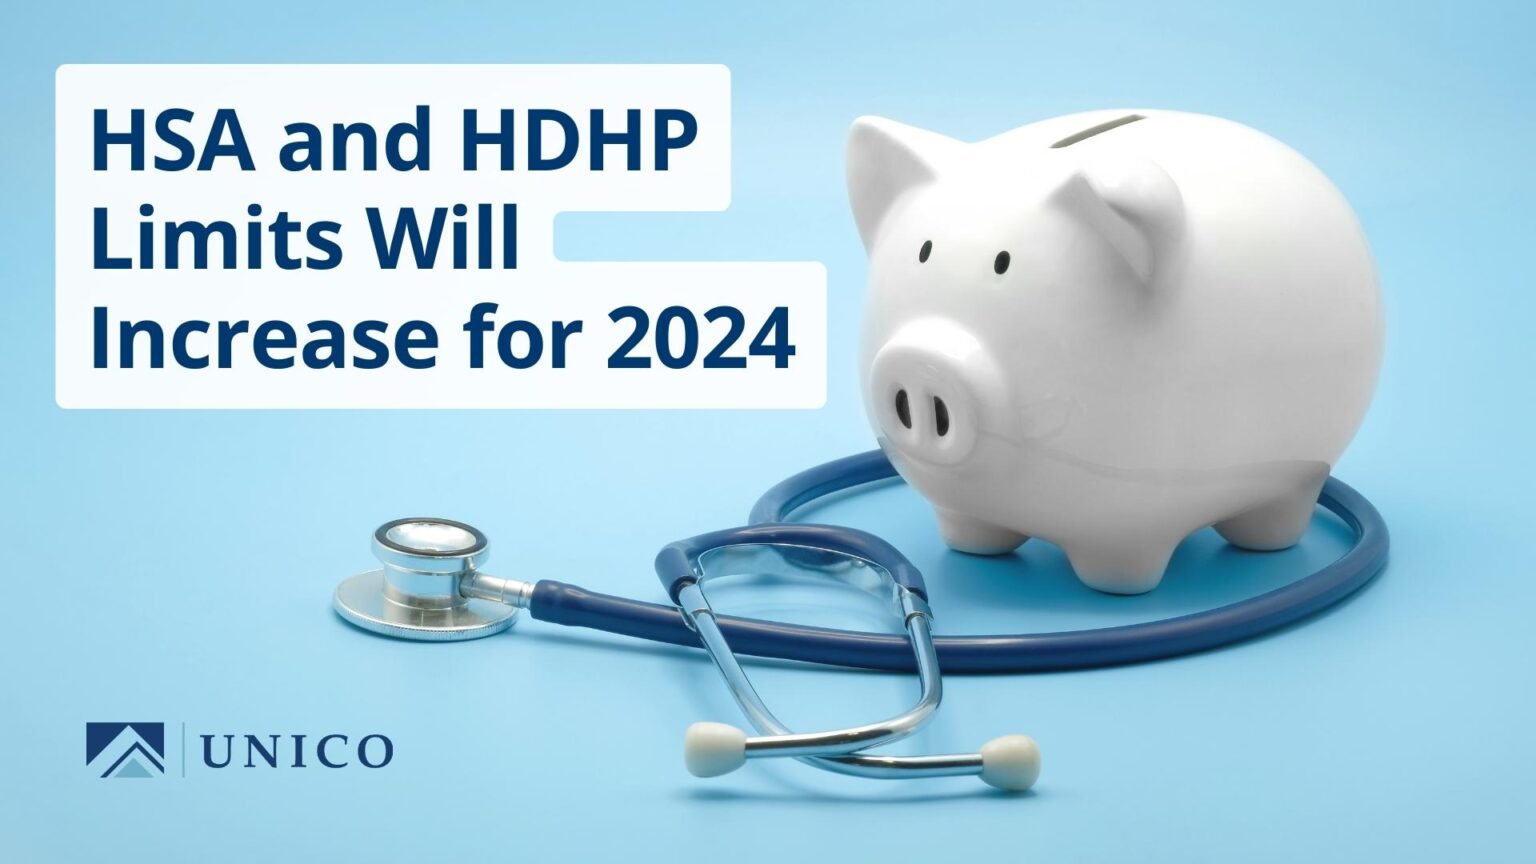 HSA and HDHP Limits Will Increase for 2024